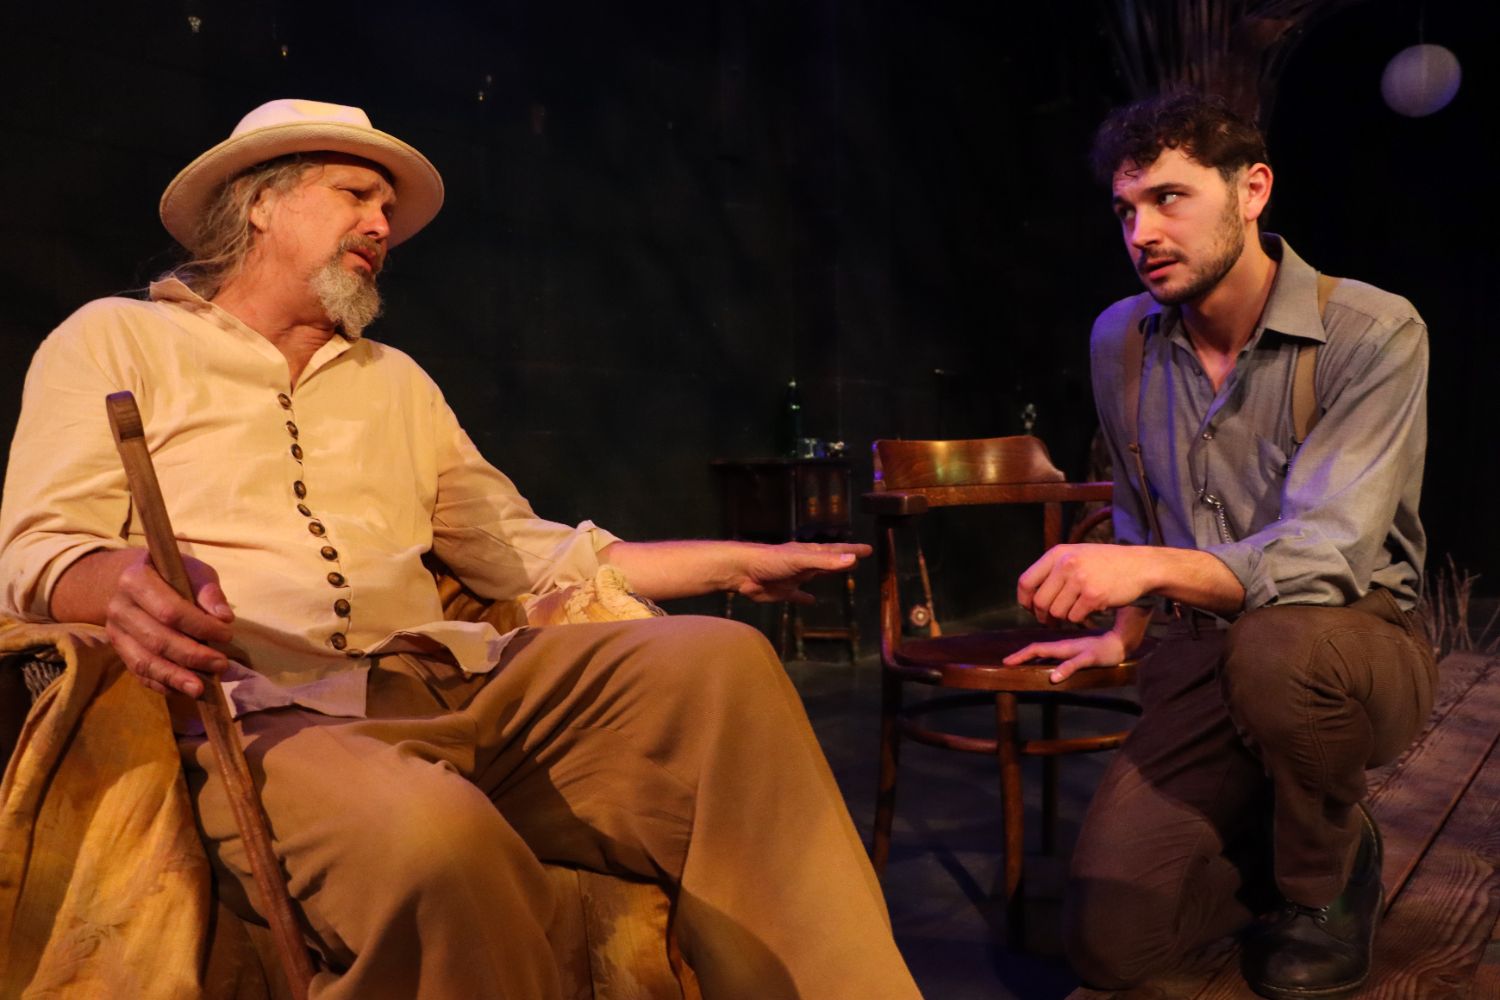 PHOTO: South Pasadena Theatre Workshop | The South Pasadenan | Clay Wilcox and Sam Cass in The Seagull on stage at South Pasadena Theatre Workshop.